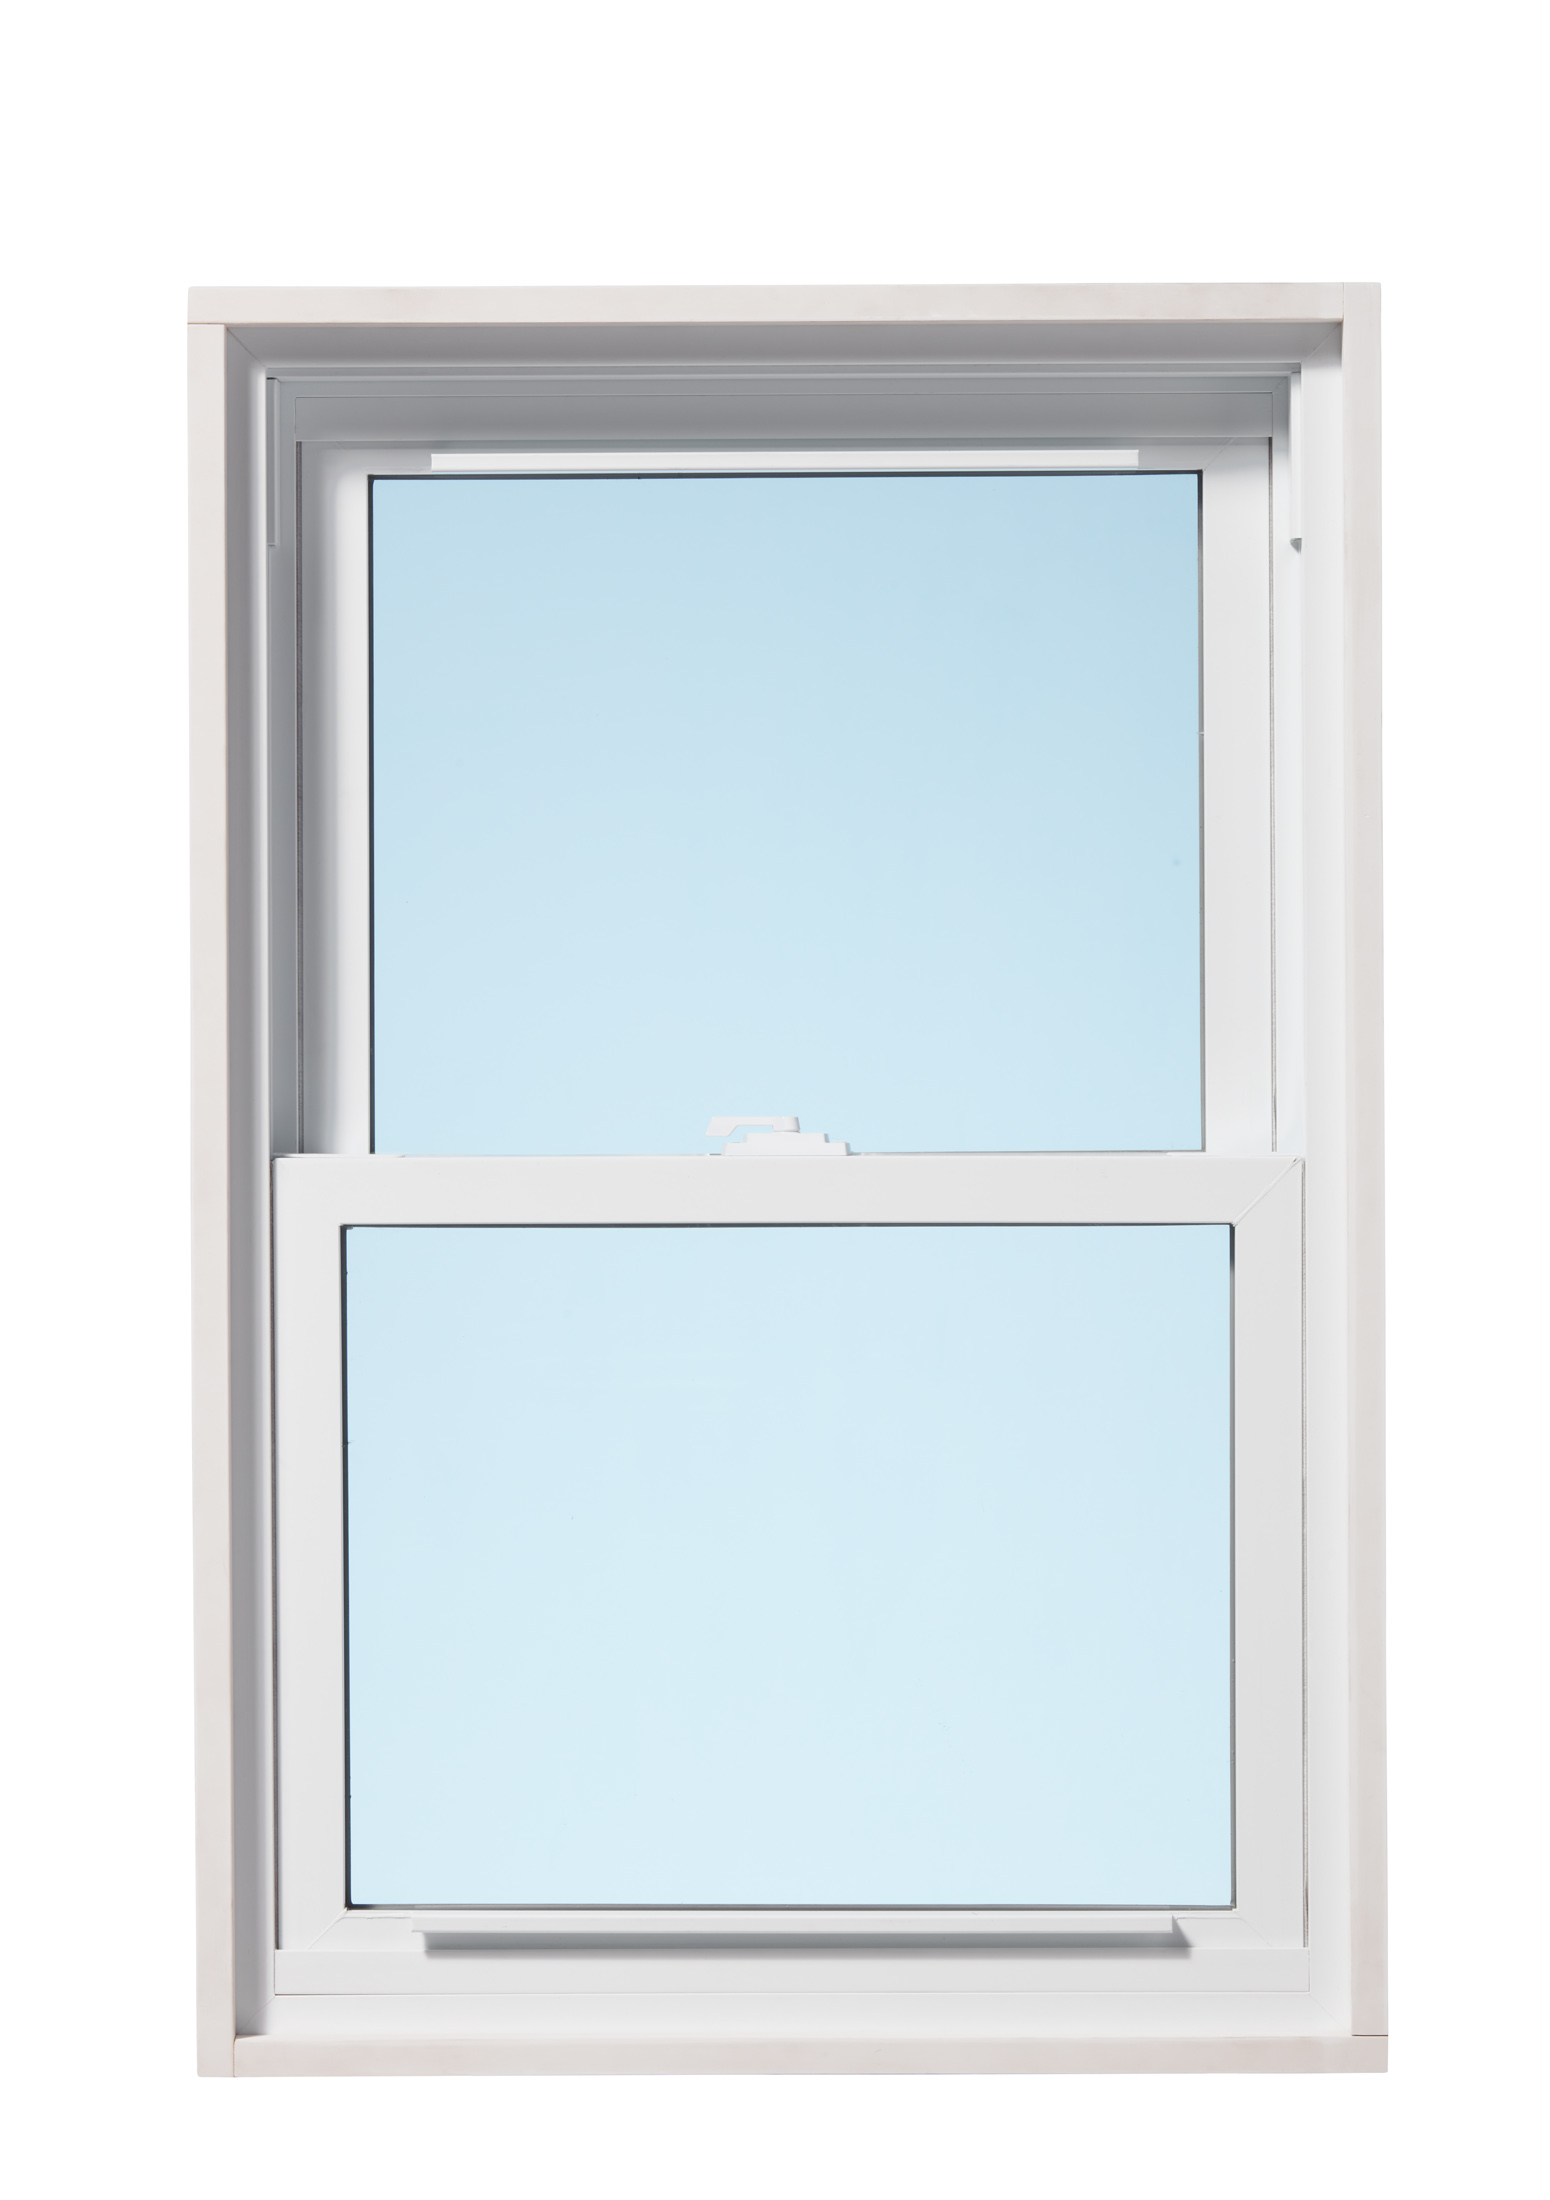 goldenvinyl®-1000-series-double-hung-window-img-6